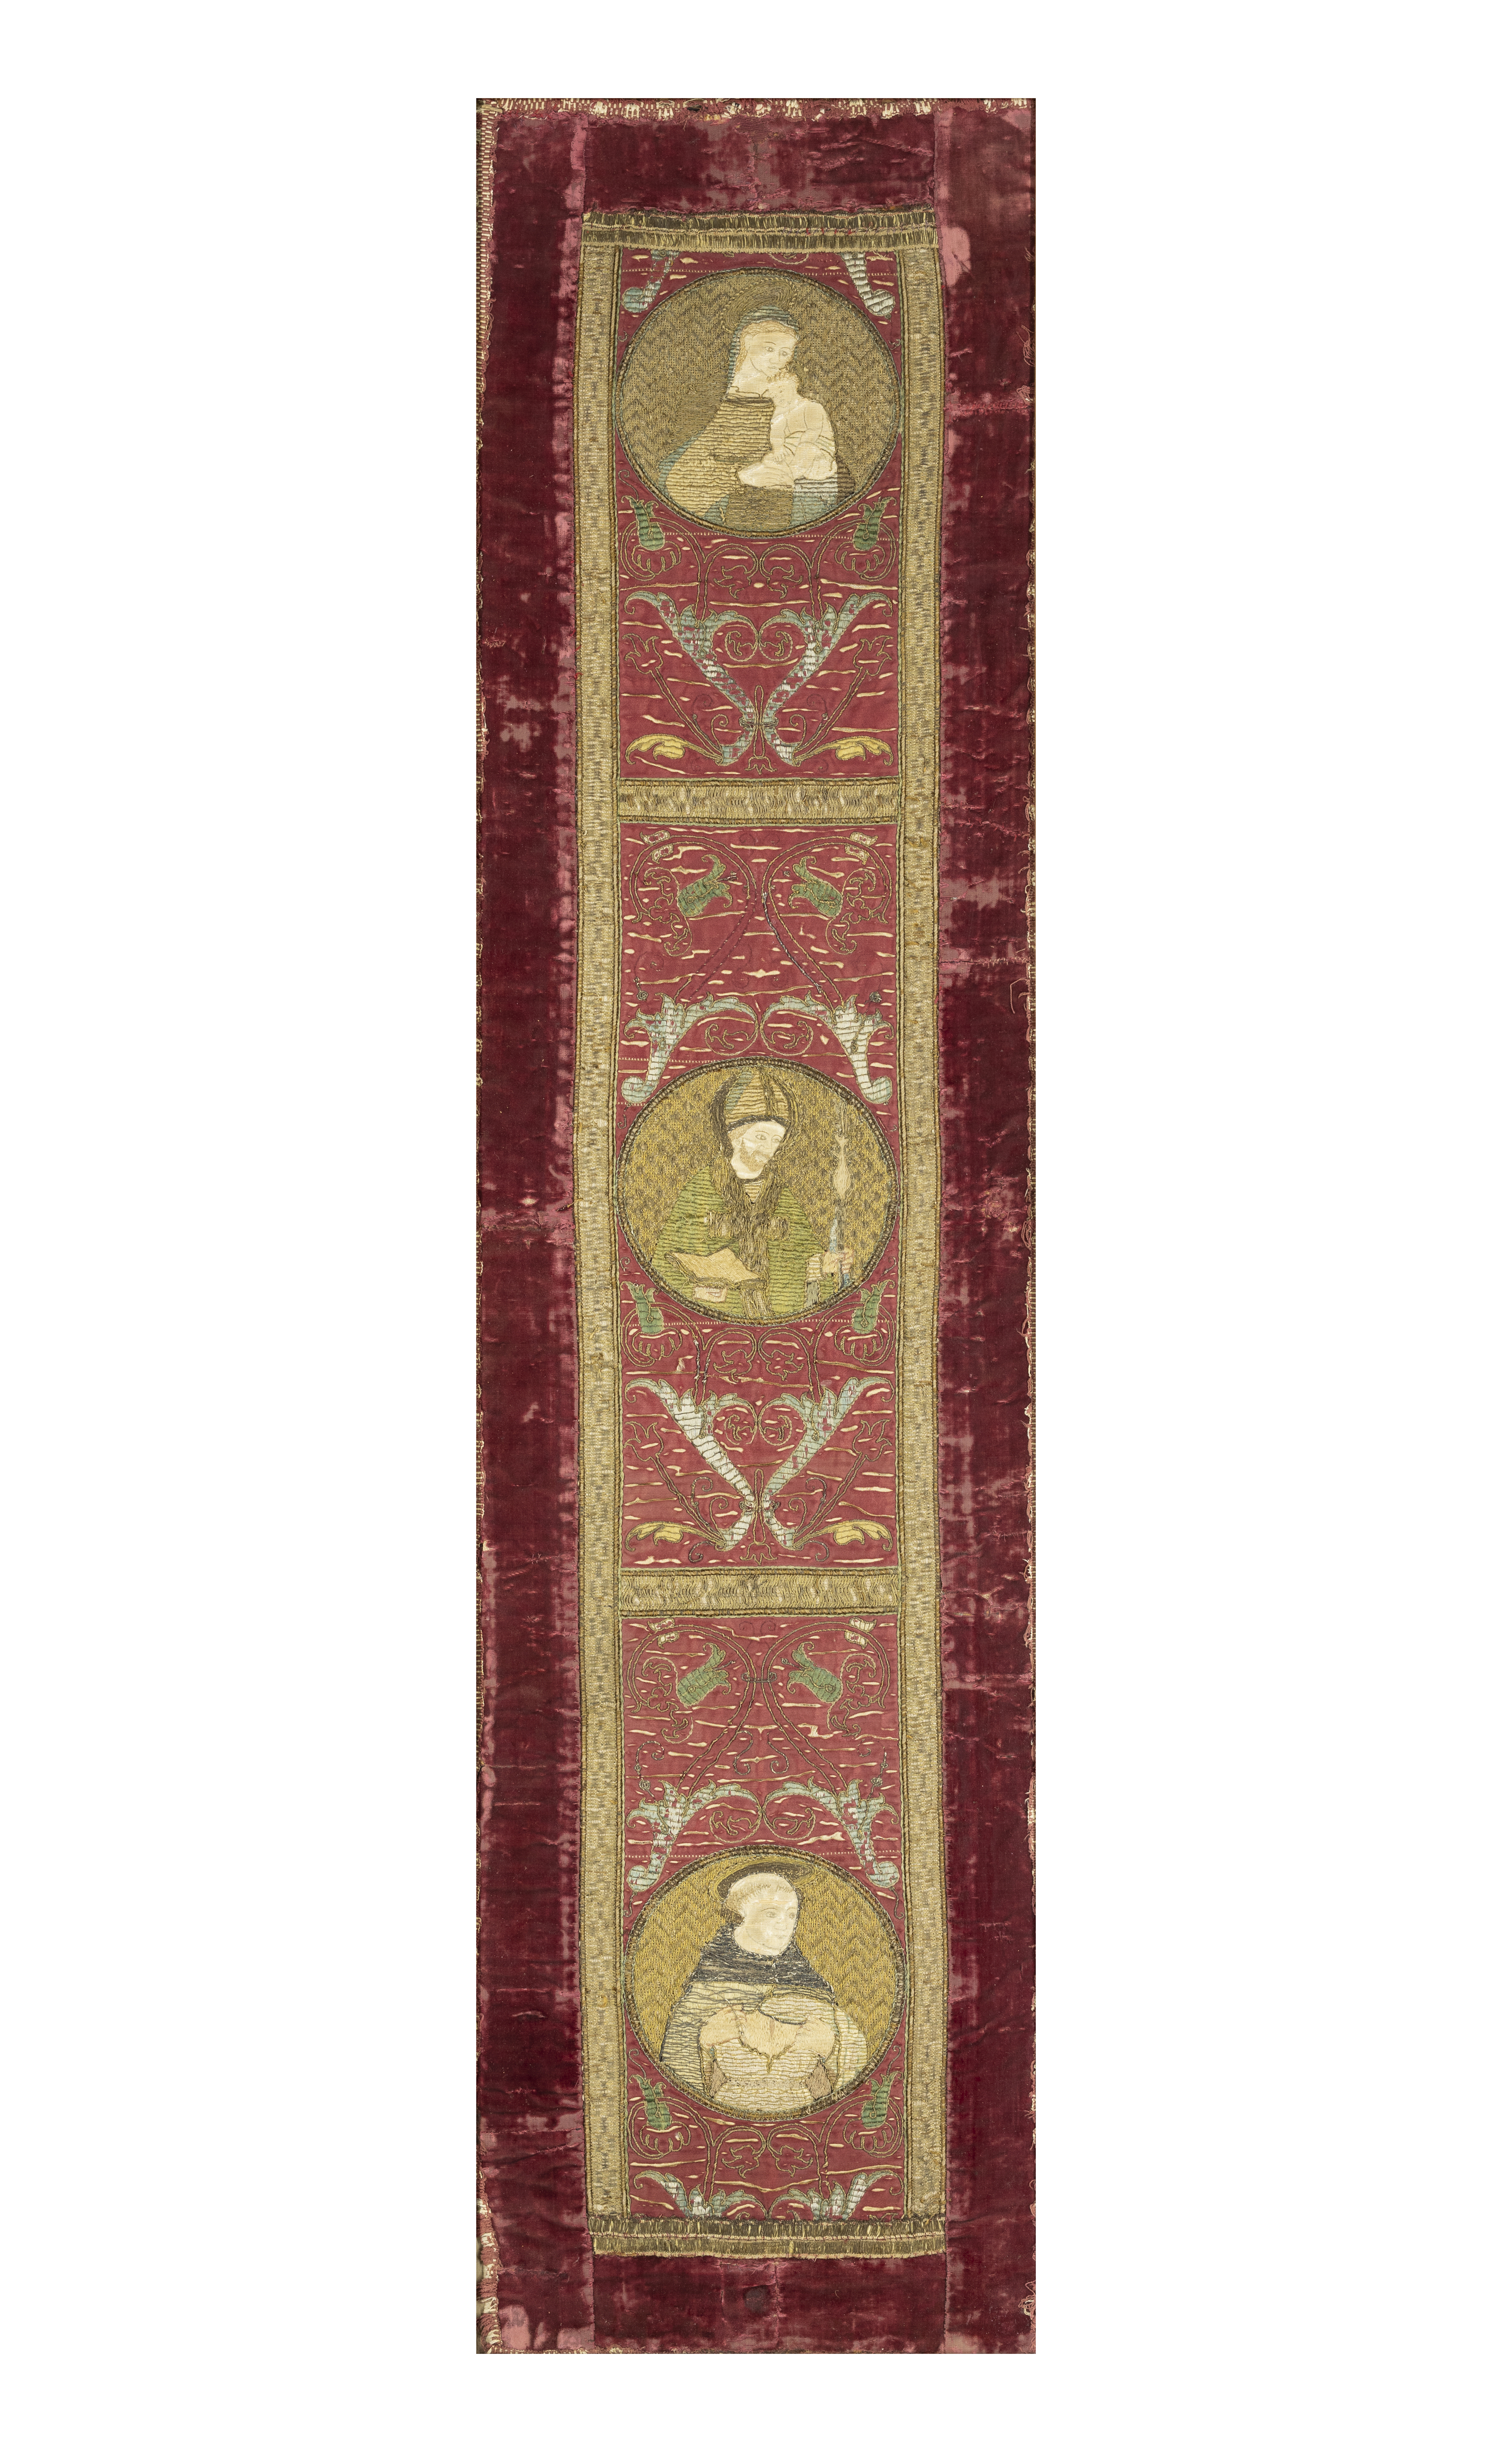 An incomplete Italian embroidered orphrey panel, First half 17th century, The central panel worke...